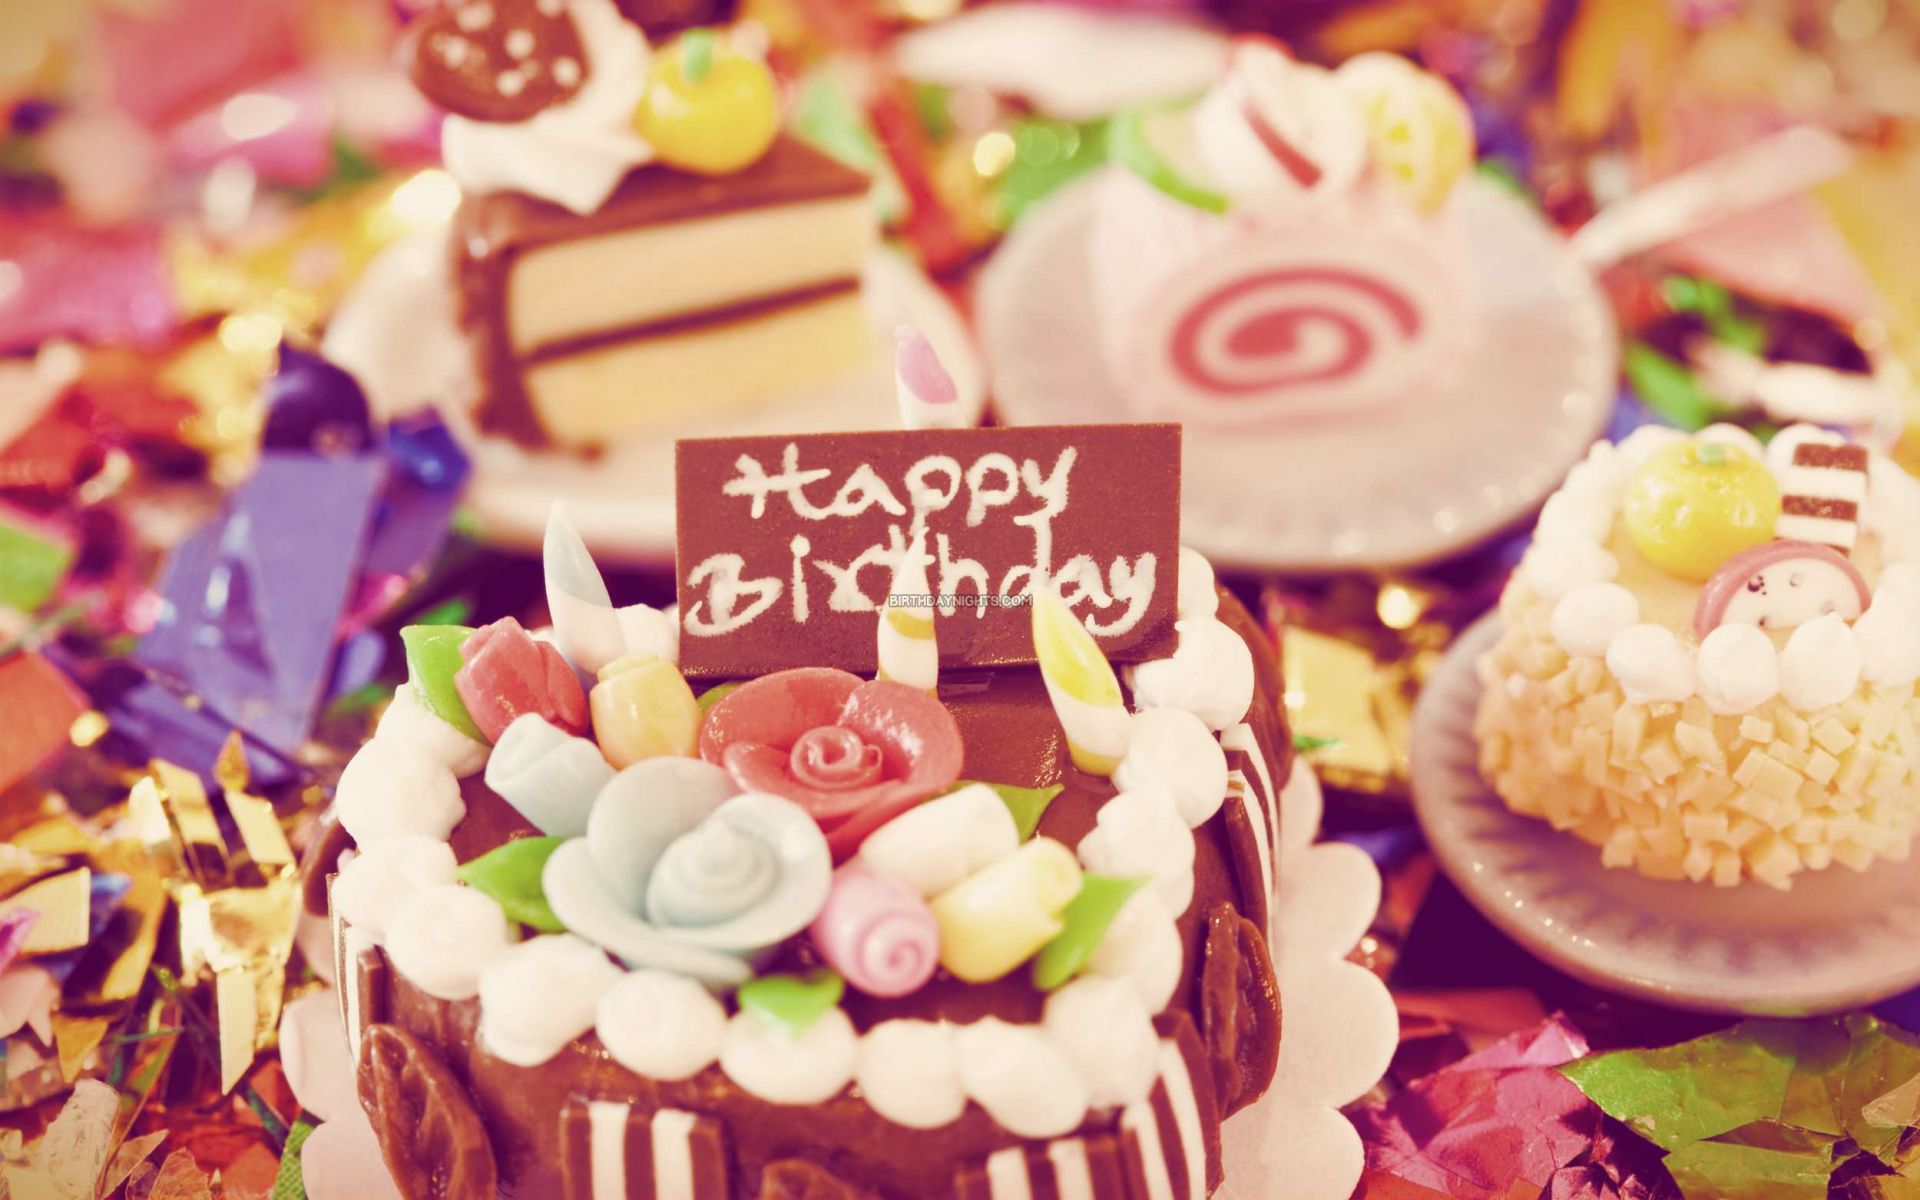 Birthday Cake Images Free Download For Mobile - choco cake happy ...